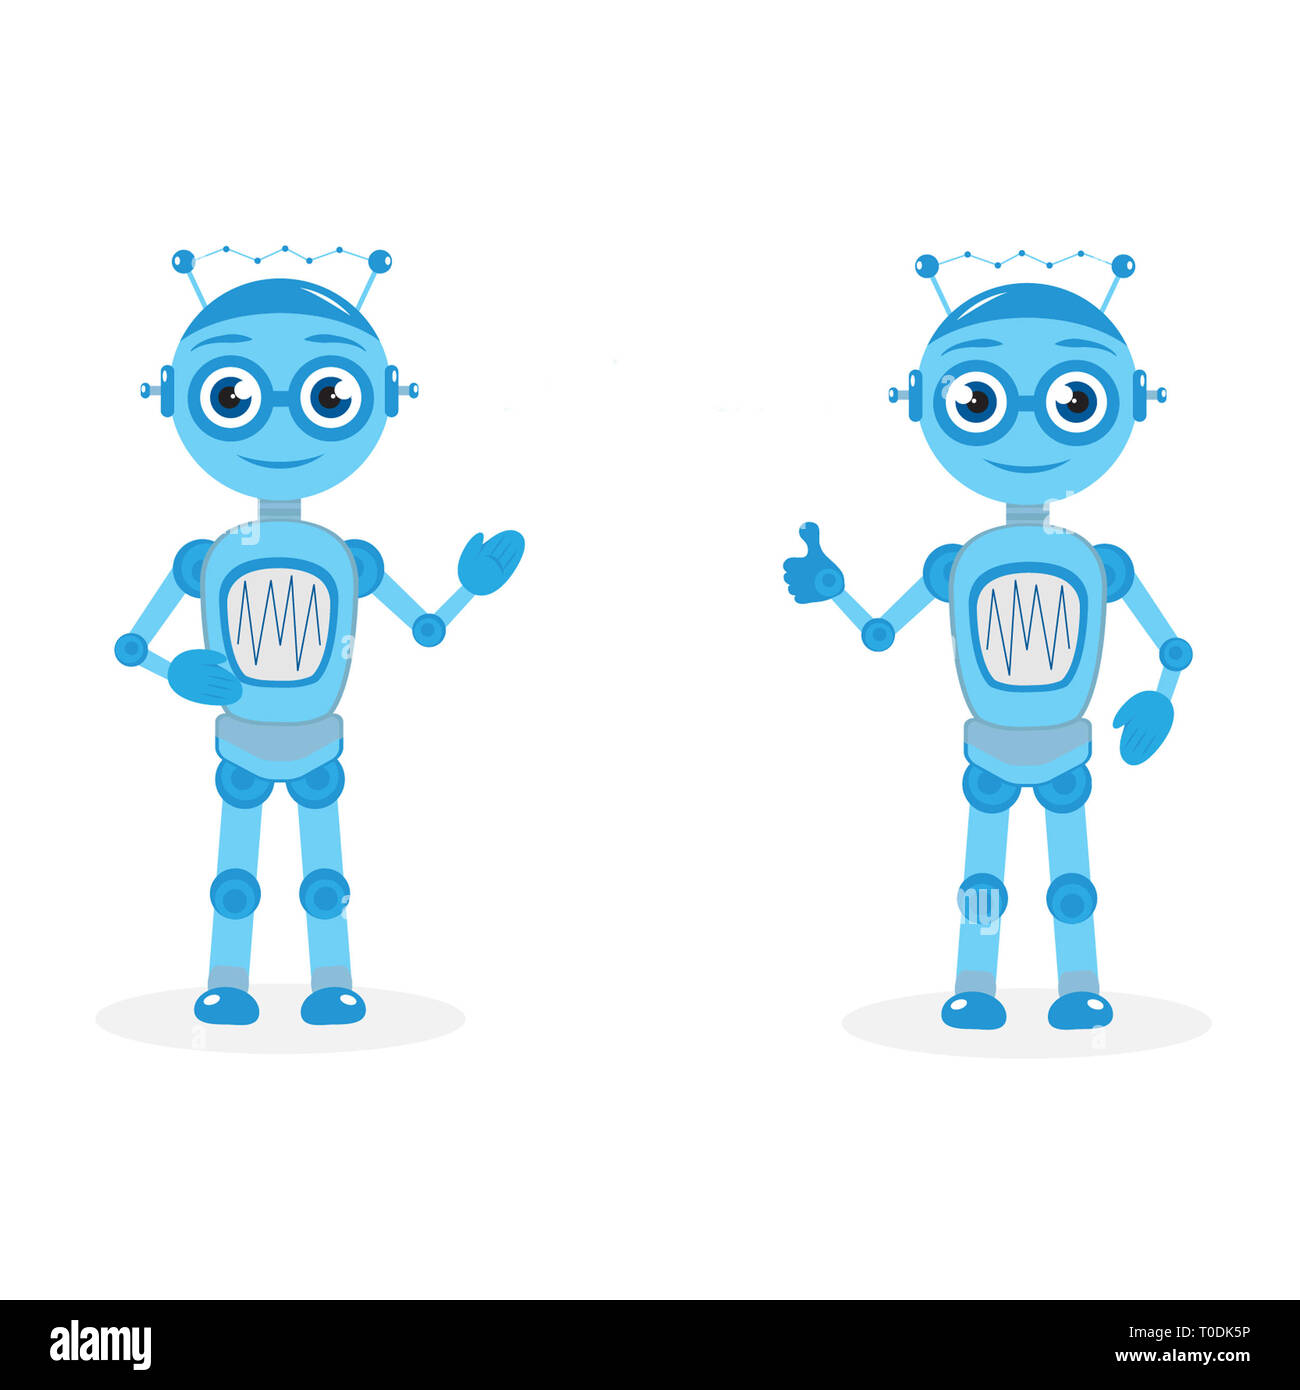 a set of blue chatbot robot, character, mascot, concept Stock Photo